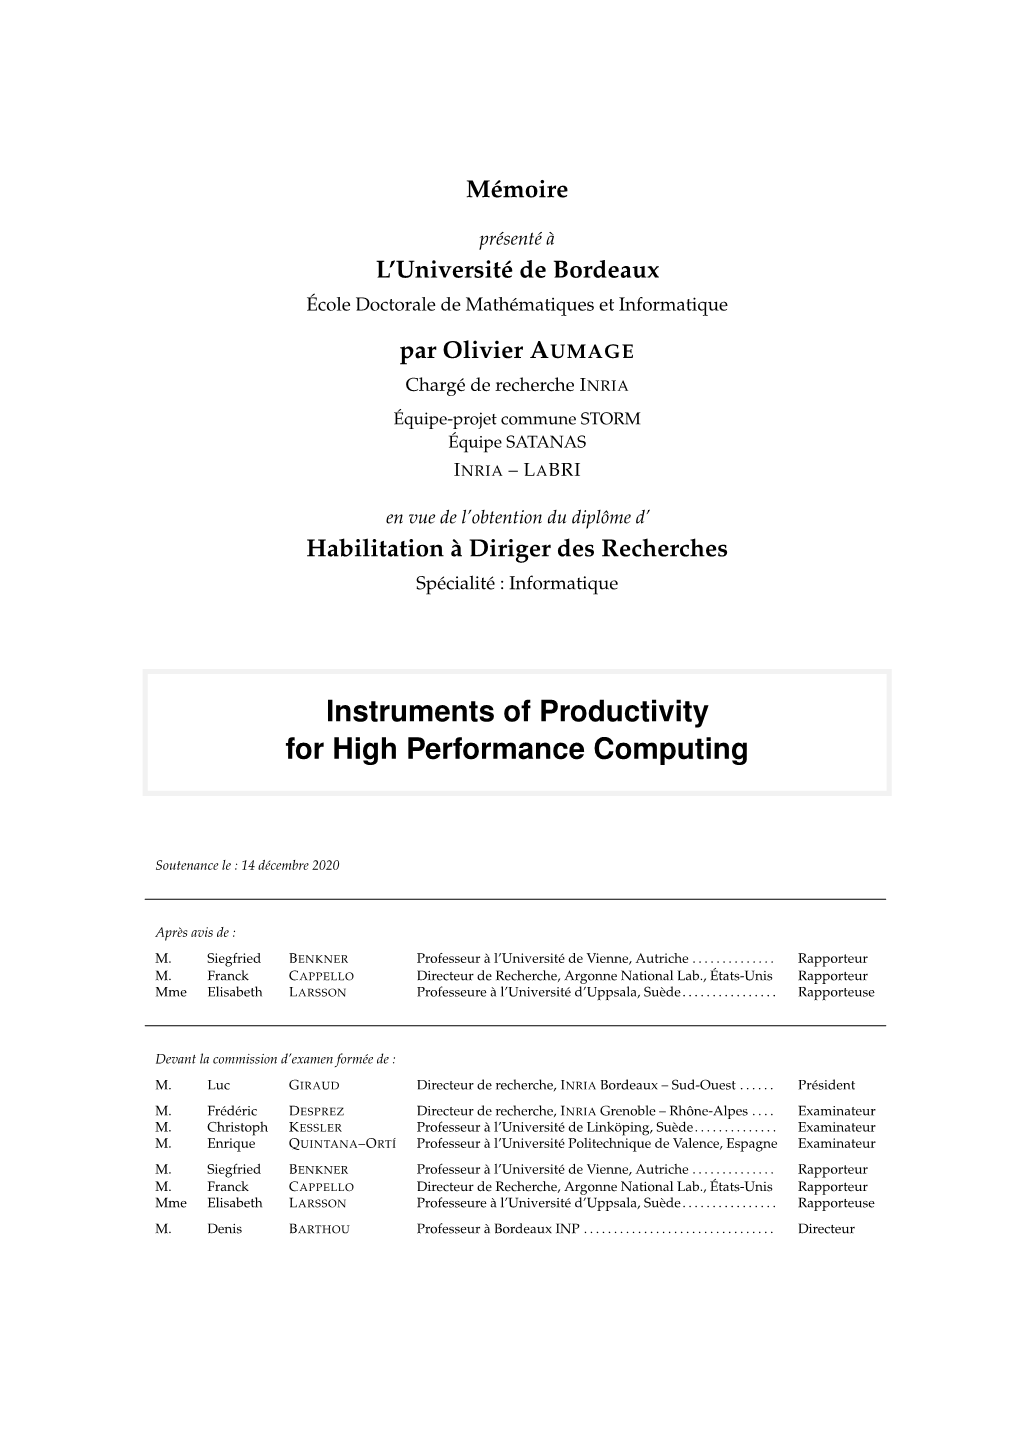 Instruments of Productivity for High Performance Computing